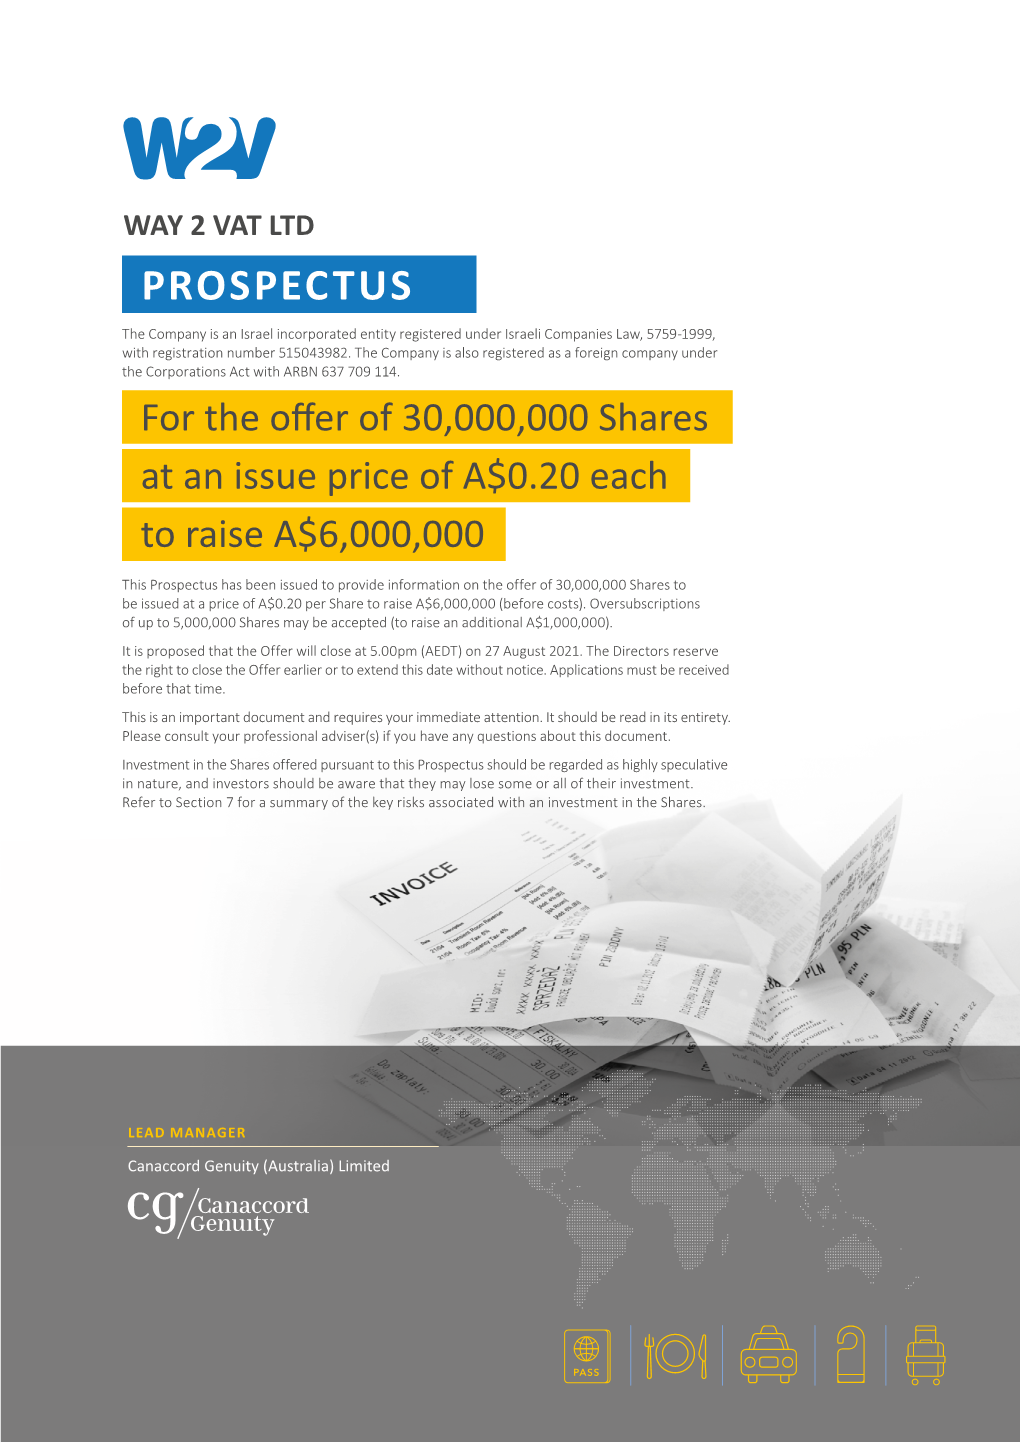 Prospectus Should Be Regarded As Highly Speculative Andin Nature, Investors Should Be Aware That They Lose May Some Or All of Their Investment